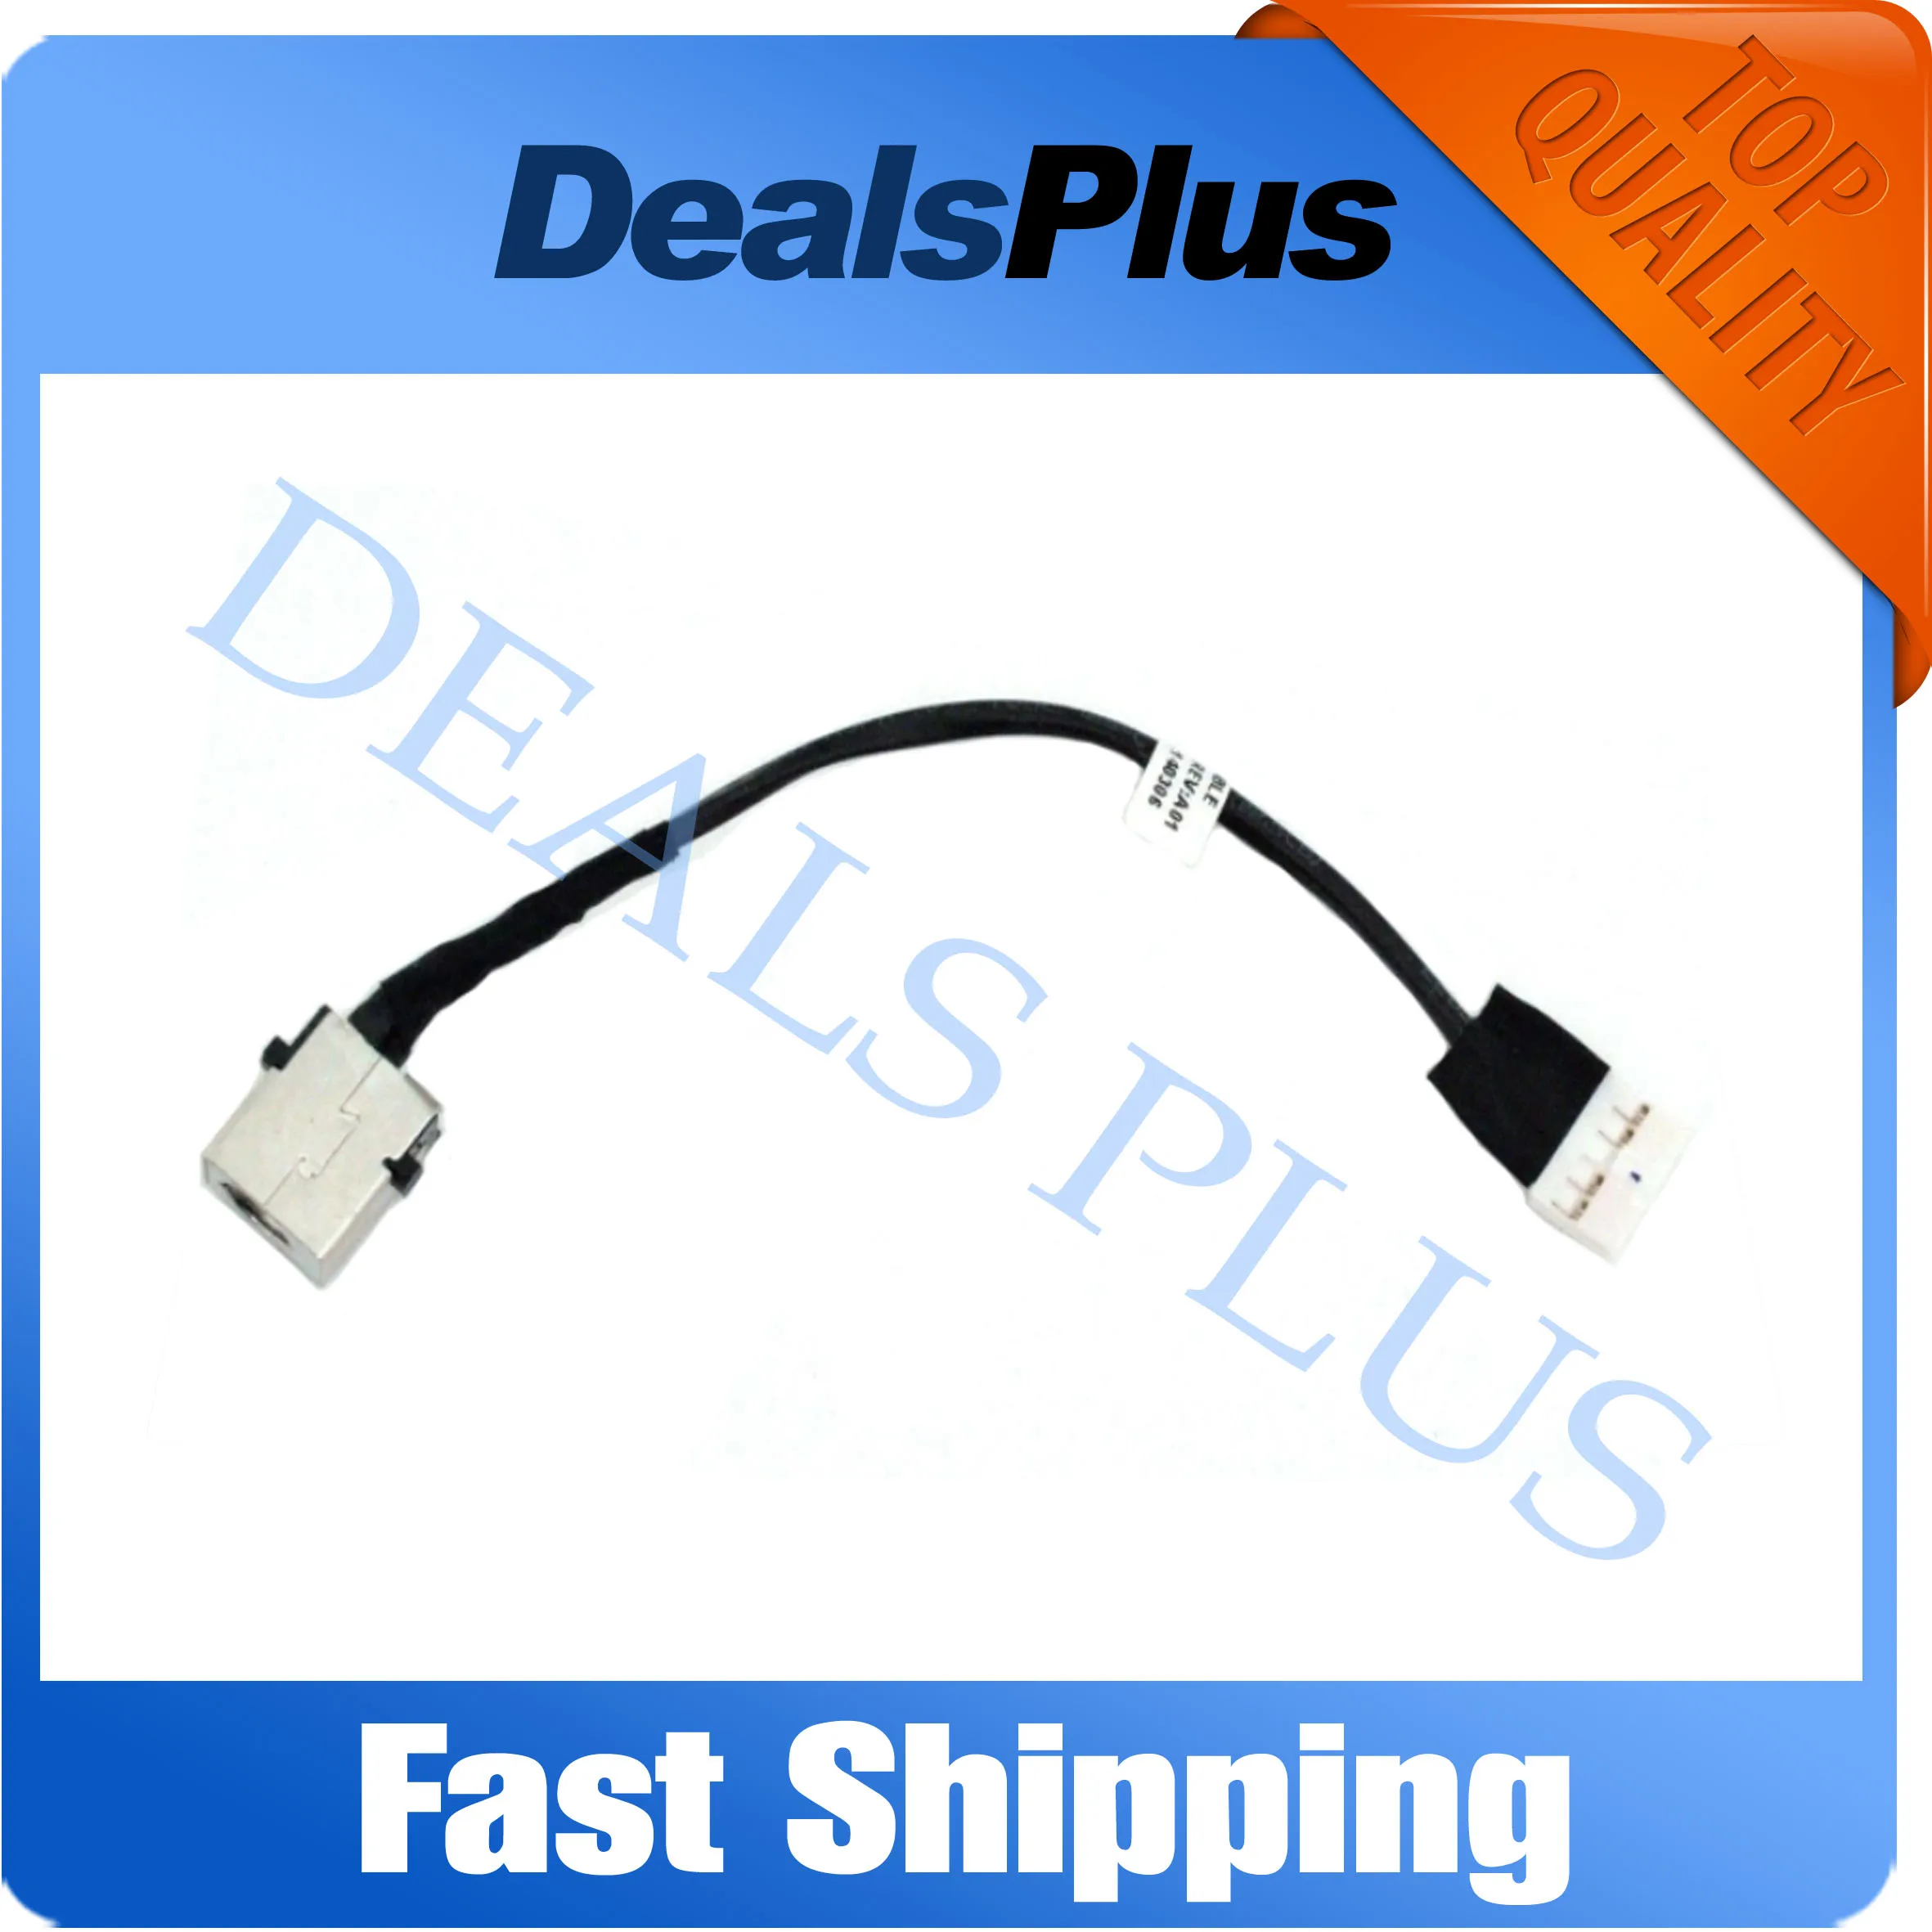 

New Replacement Laptop DC Power Jack Cable For Acer Aspire V5-122 V5-122P MS2377 Series 50.4LK03.011 50.4LK03.021